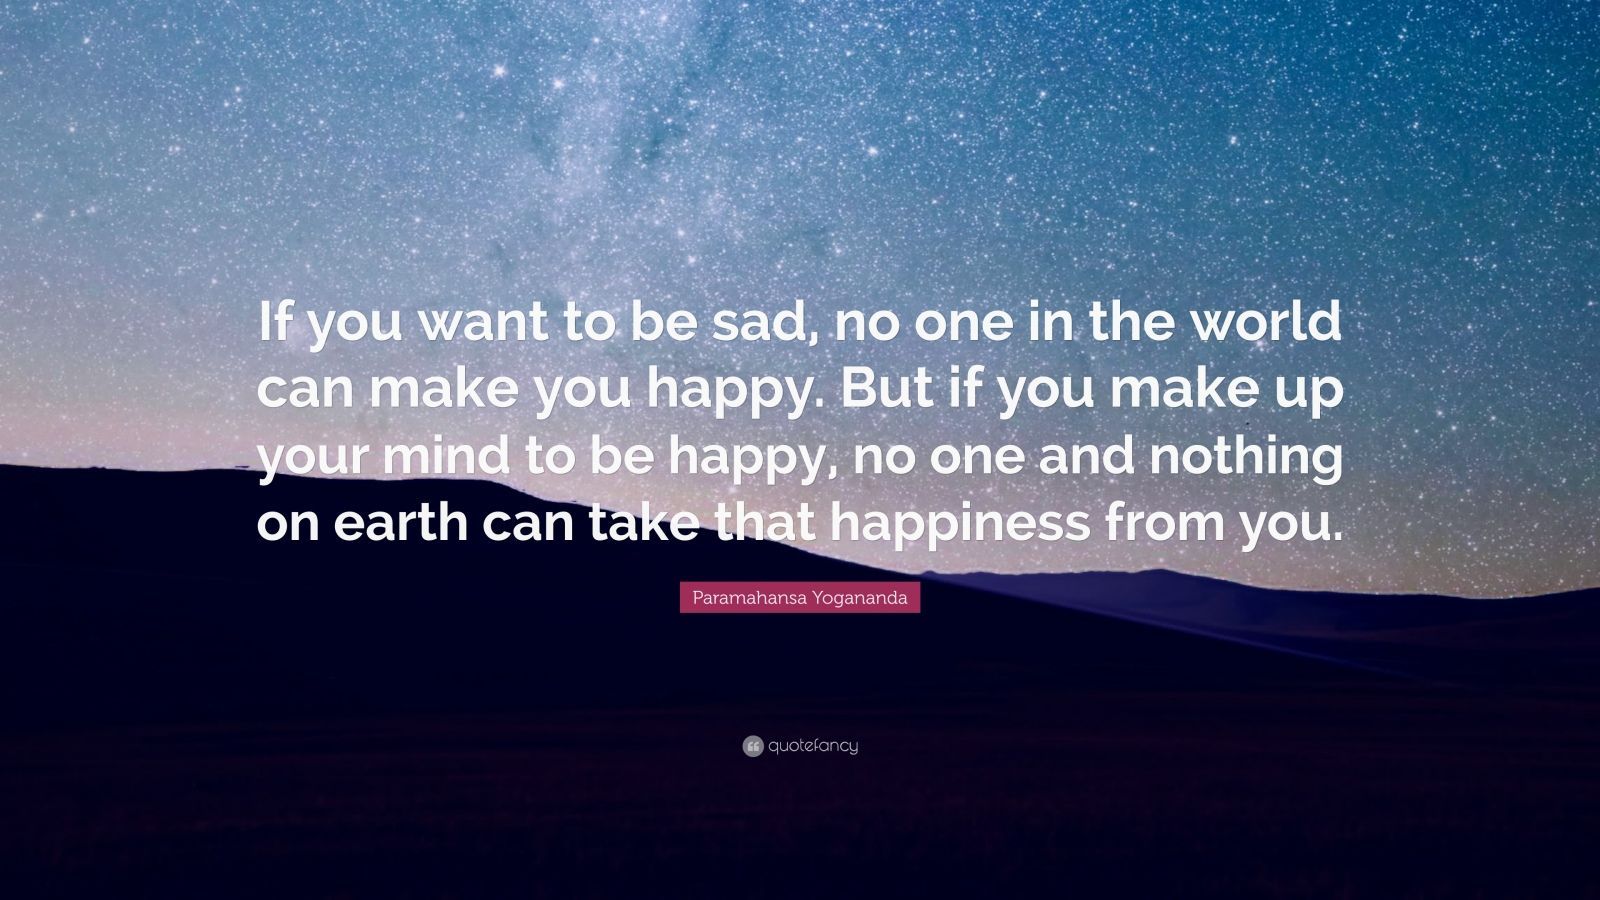 Paramahansa Yogananda Quote: “If you want to be sad, no one in